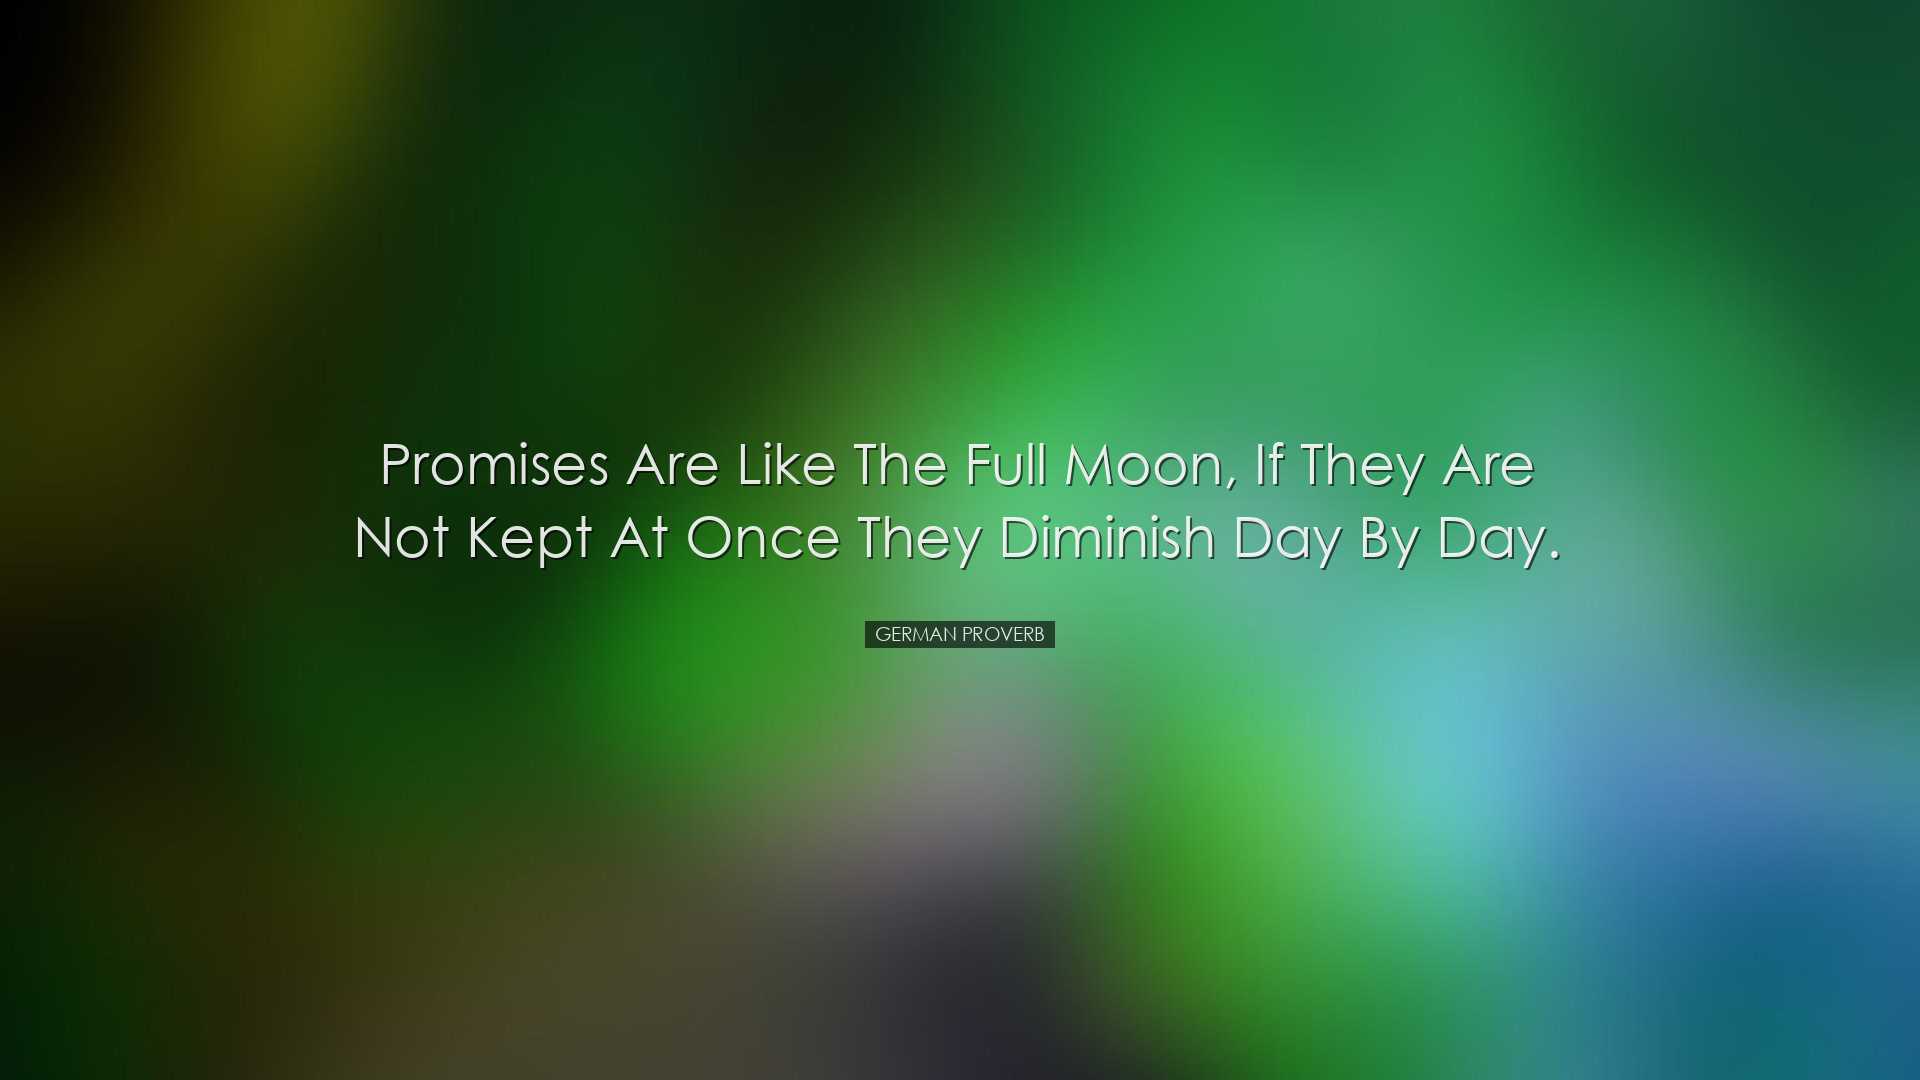 Promises are like the full moon, if they are not kept at once they